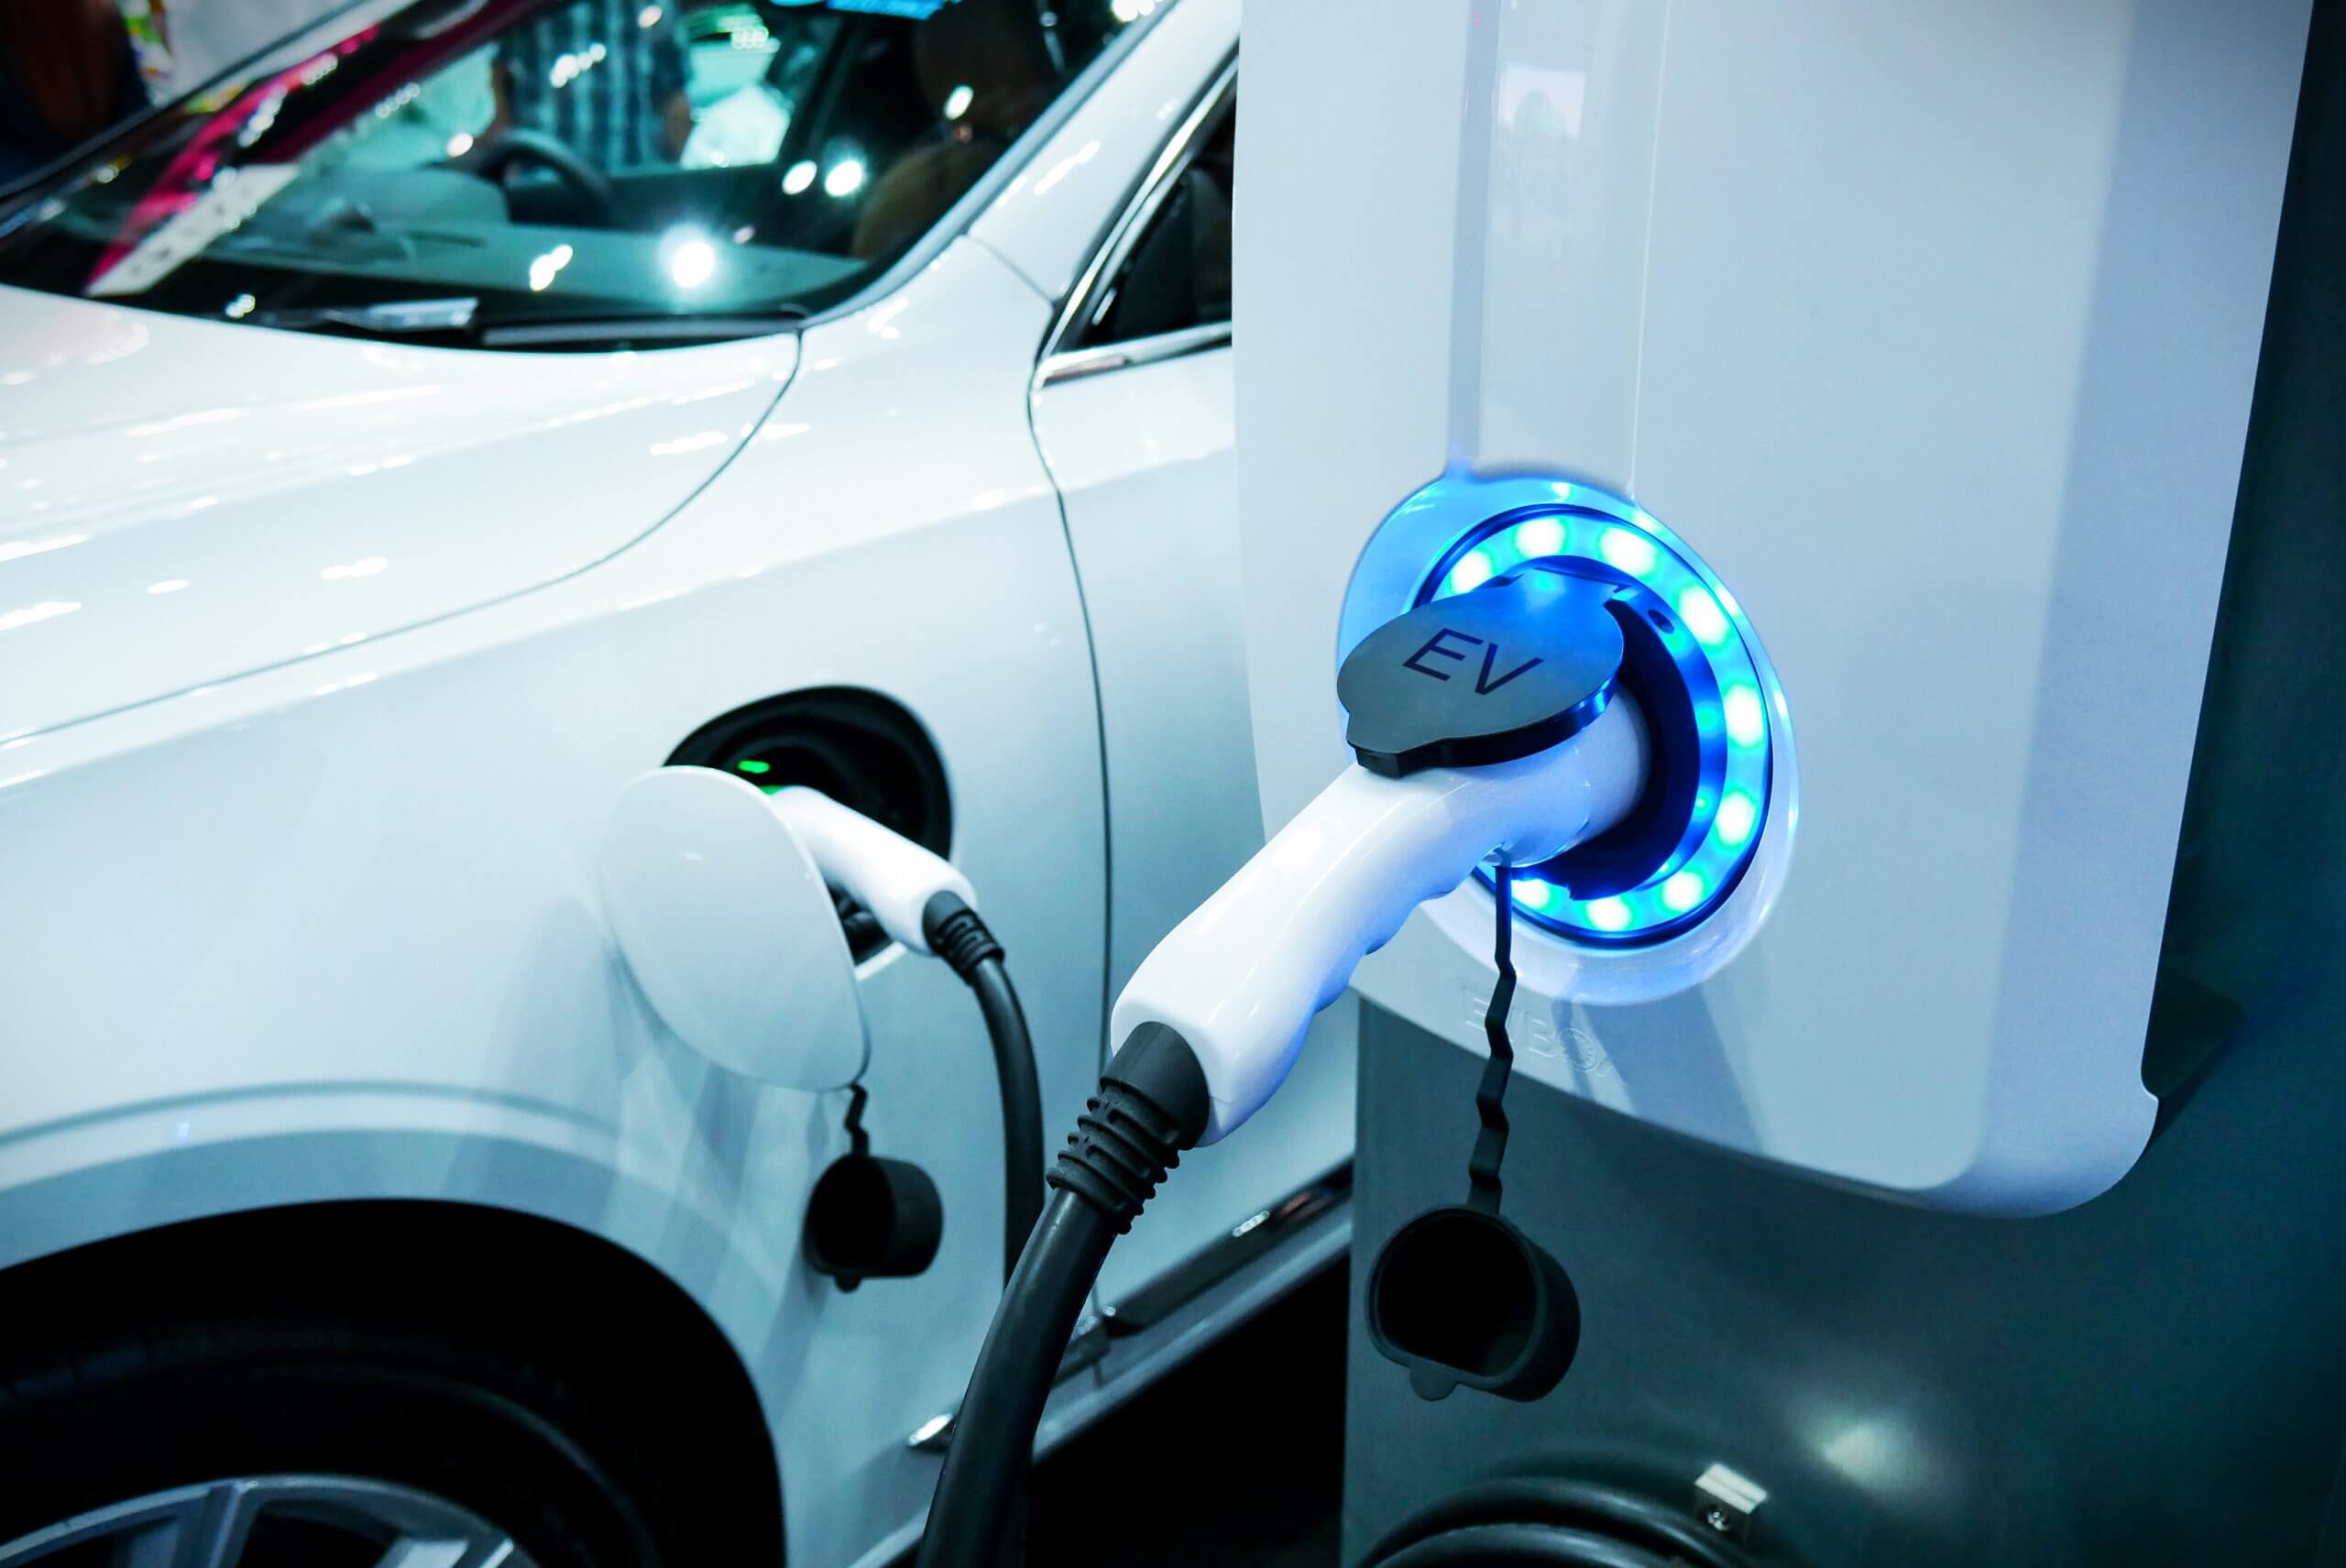 New battery innovation could accelerate the roll-out of EVs, AVs